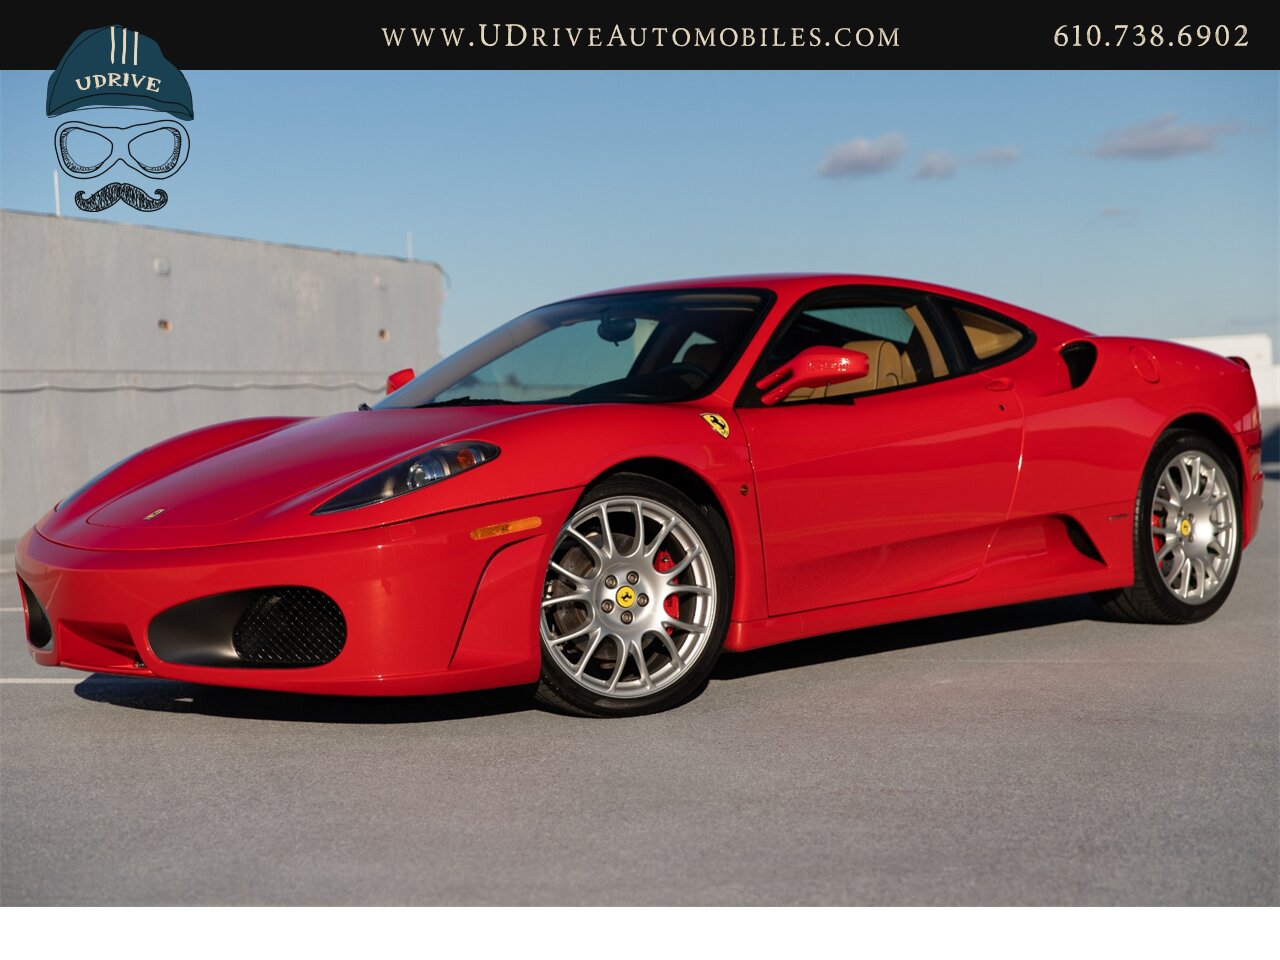 2006 Ferrari F430 F1 Coupe 1 Owner Daytona Seats Challenge Whls  Carbon Fibre Upper Lower Zone Shields Piping Serv Hist $208k MSRP - Photo 1 - West Chester, PA 19382